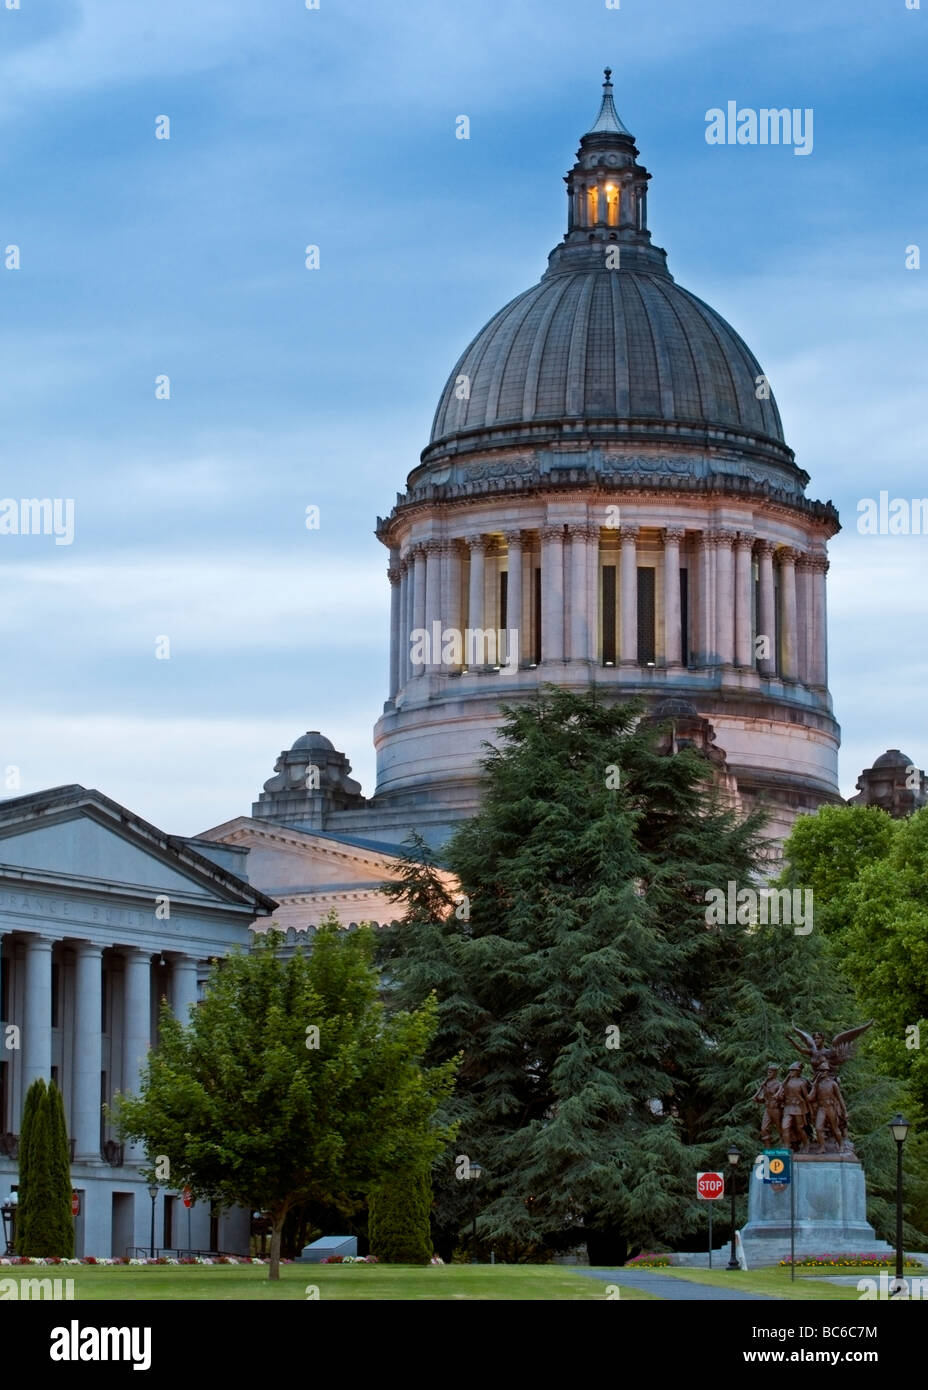 Washington State Capitol building in Olympia, Washington boasts one of the tallest free standing masonry domes in the world. Stock Photo